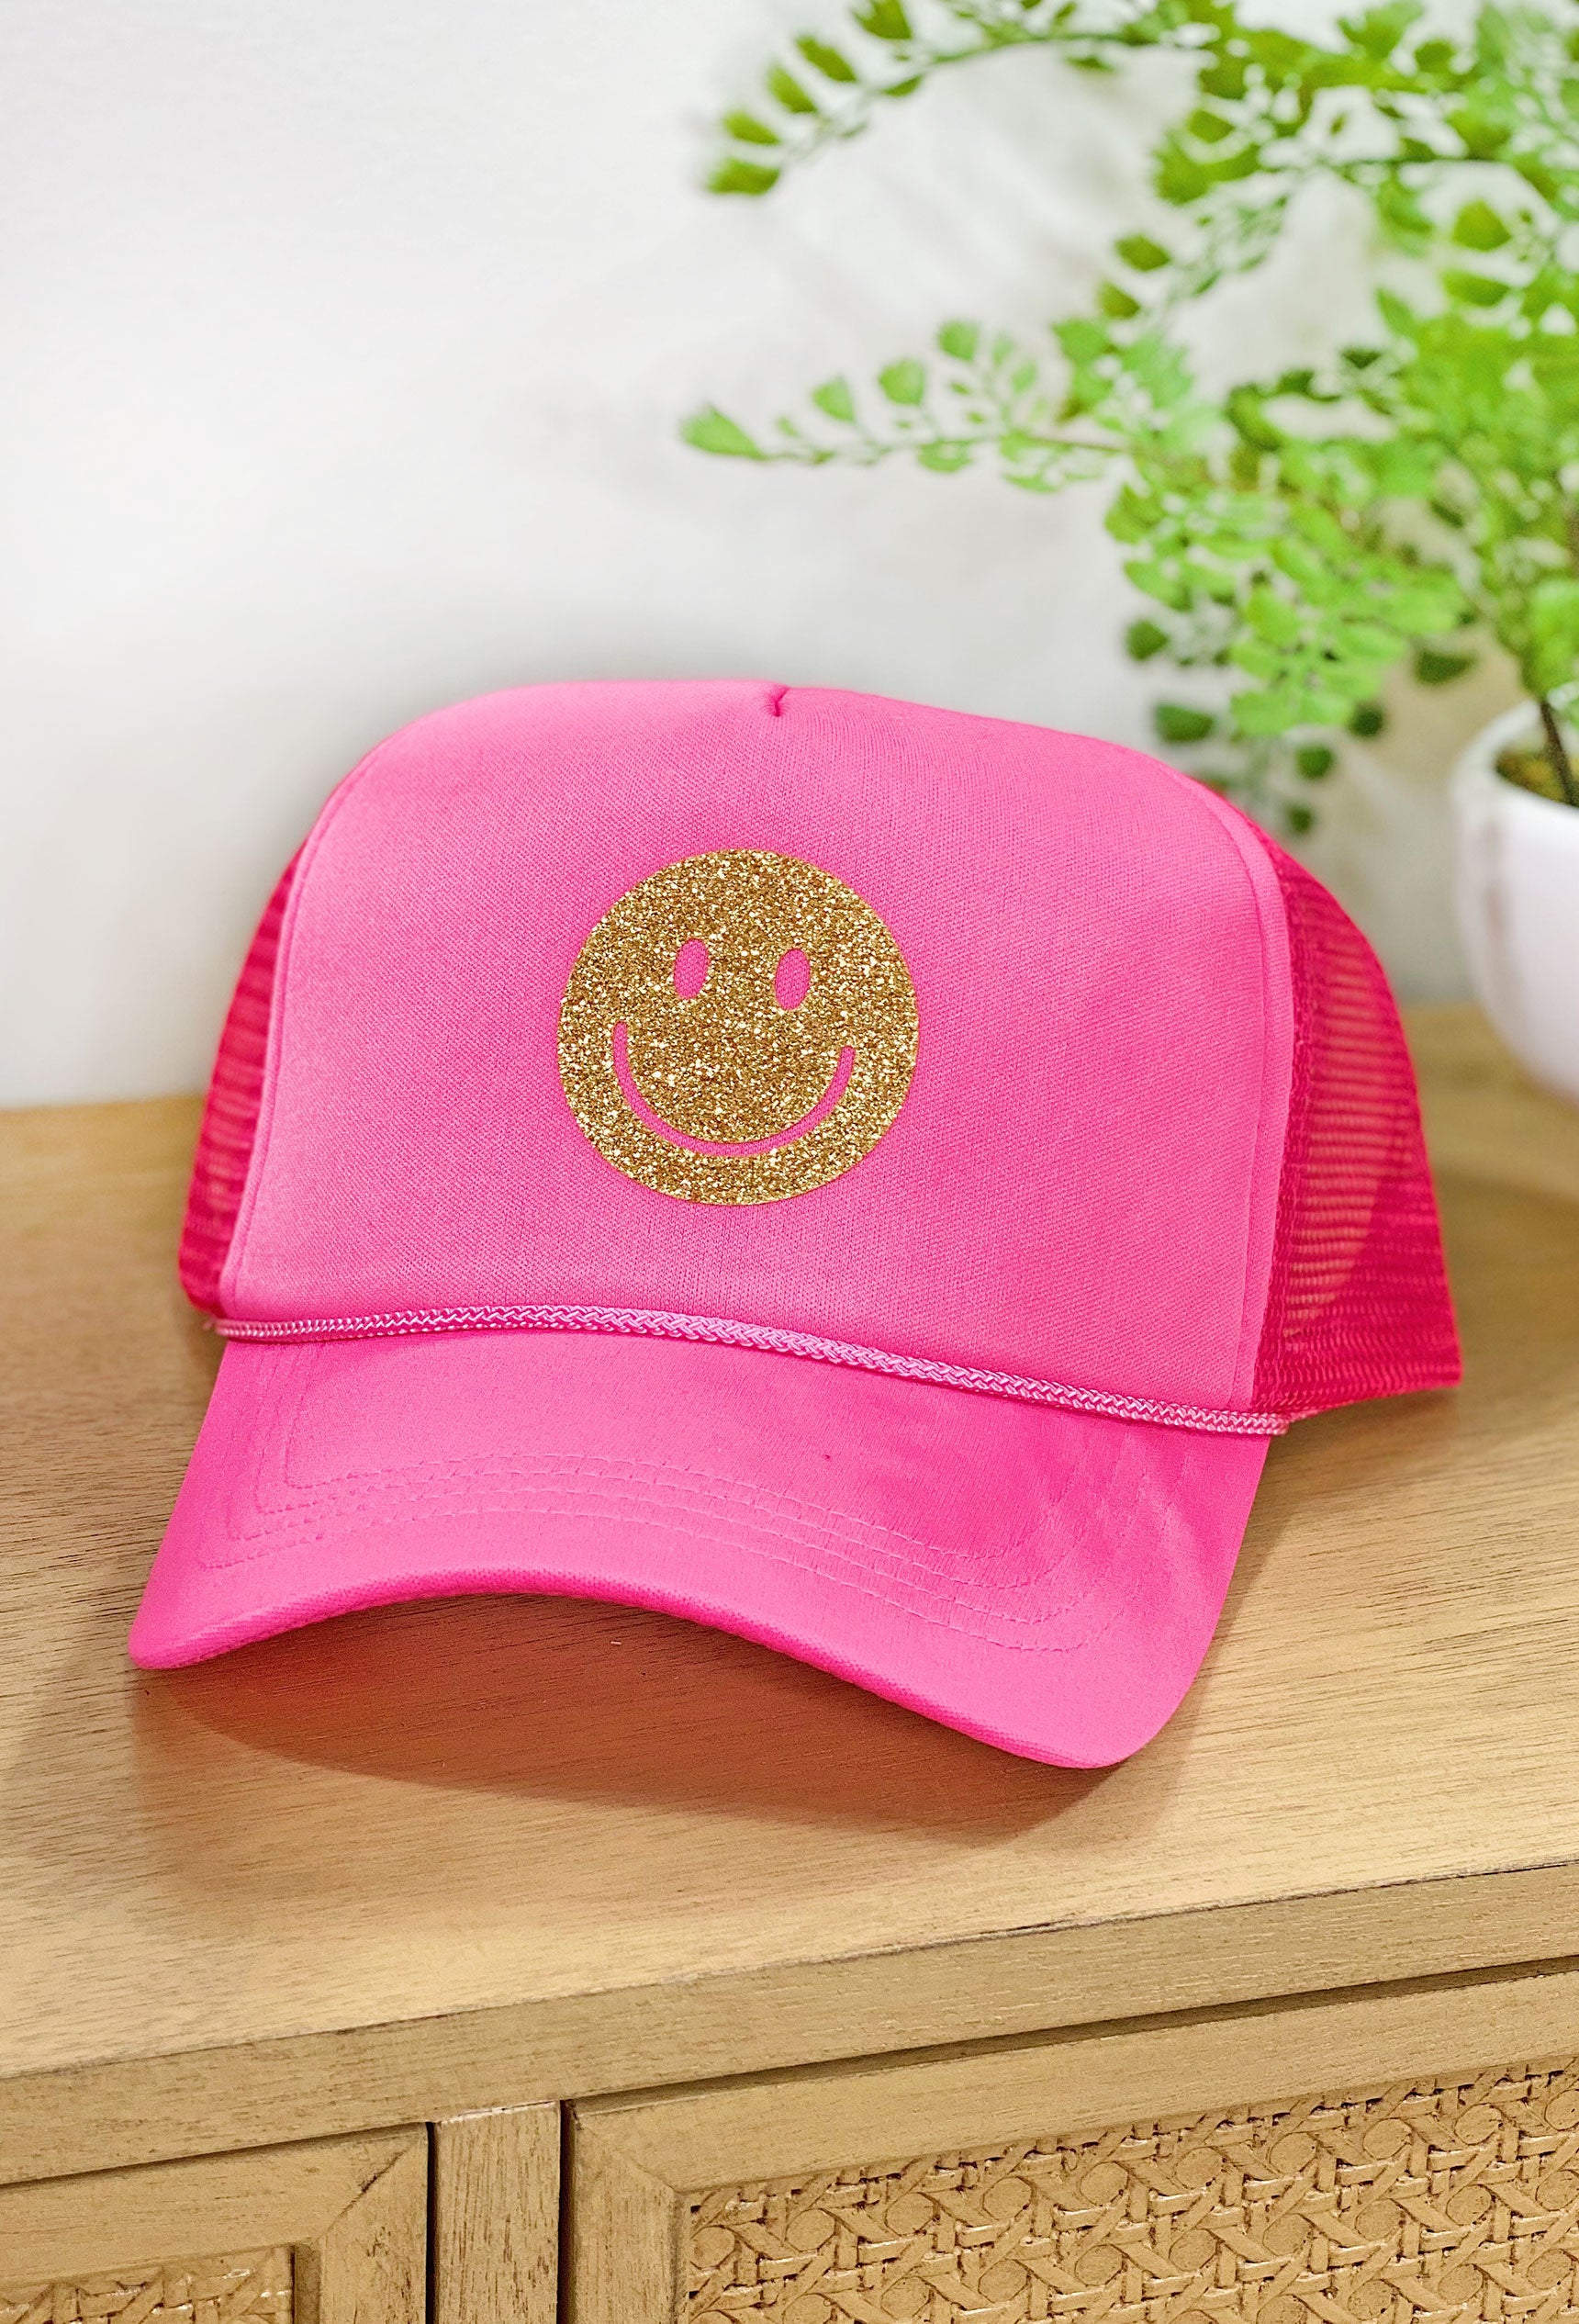 Smiles For Miles Trucker Hat in Pink, pink trucker hat with gold smiley face